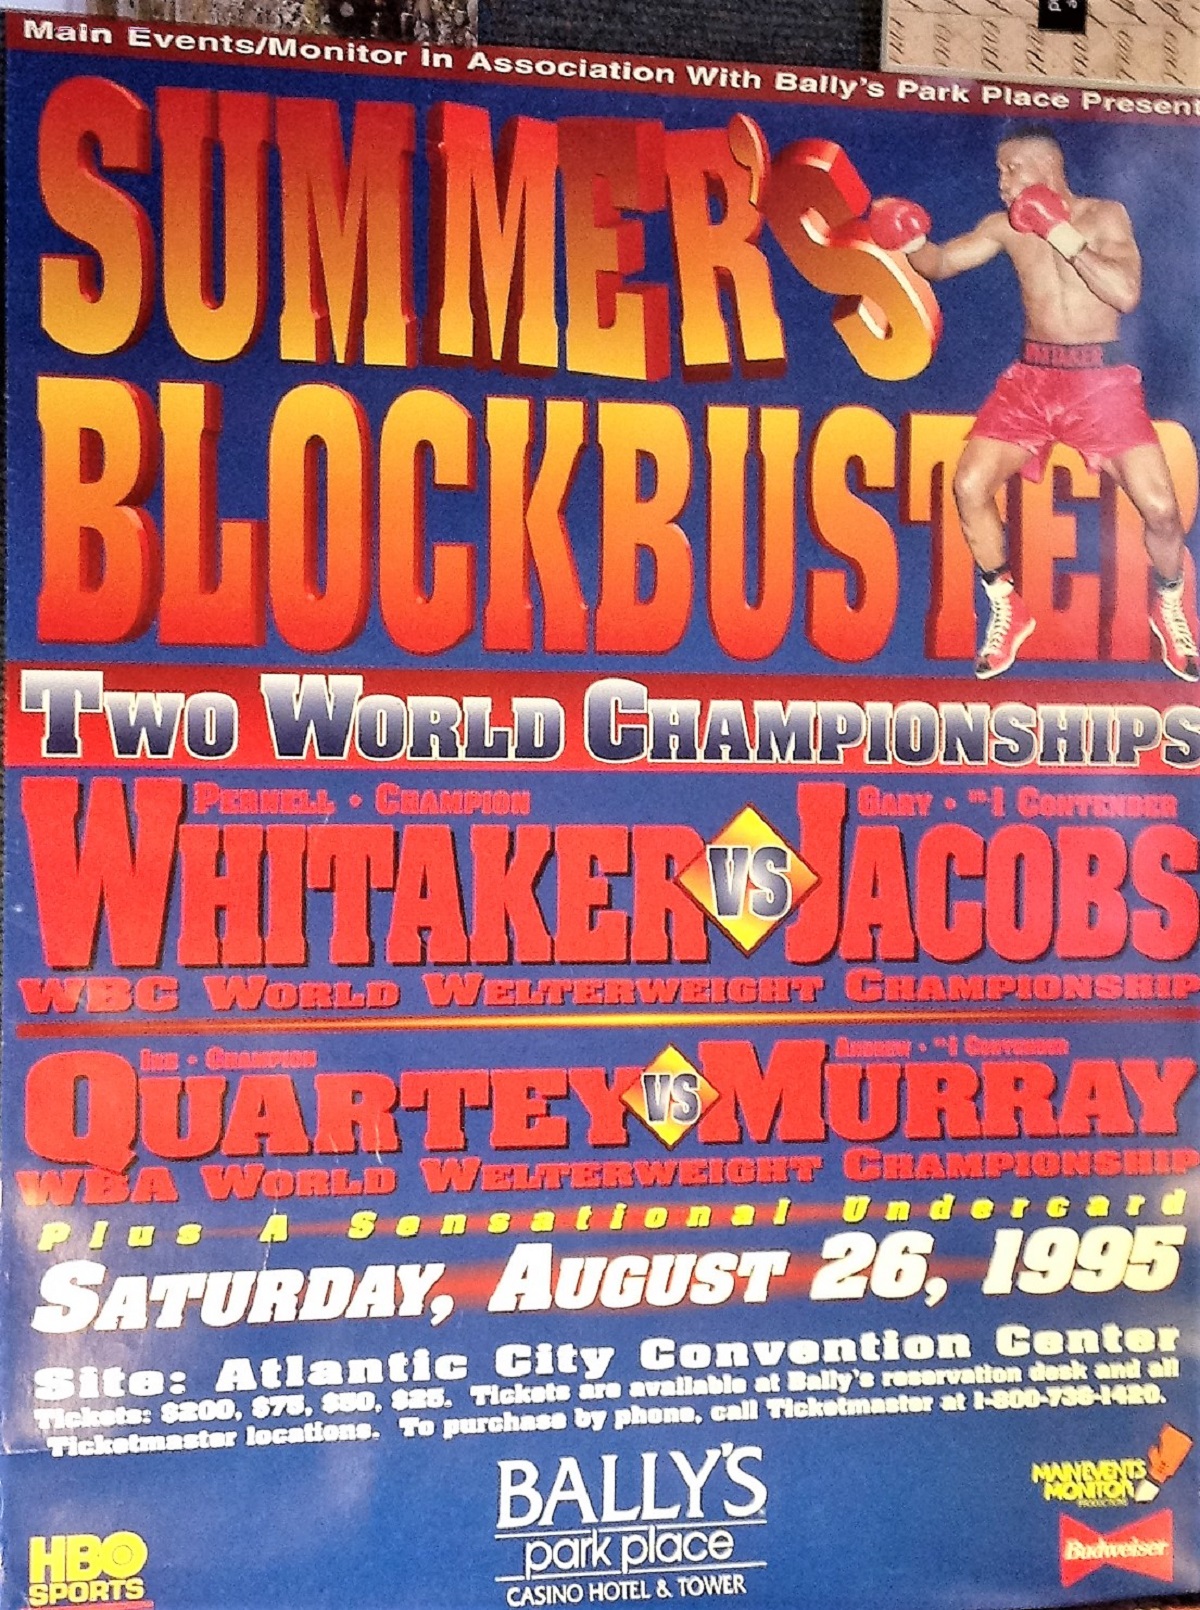 Pernell Whitaker Vs Gary Jacobs 1995 World Title 22x28 Boxing Poster. Condition 8/10.